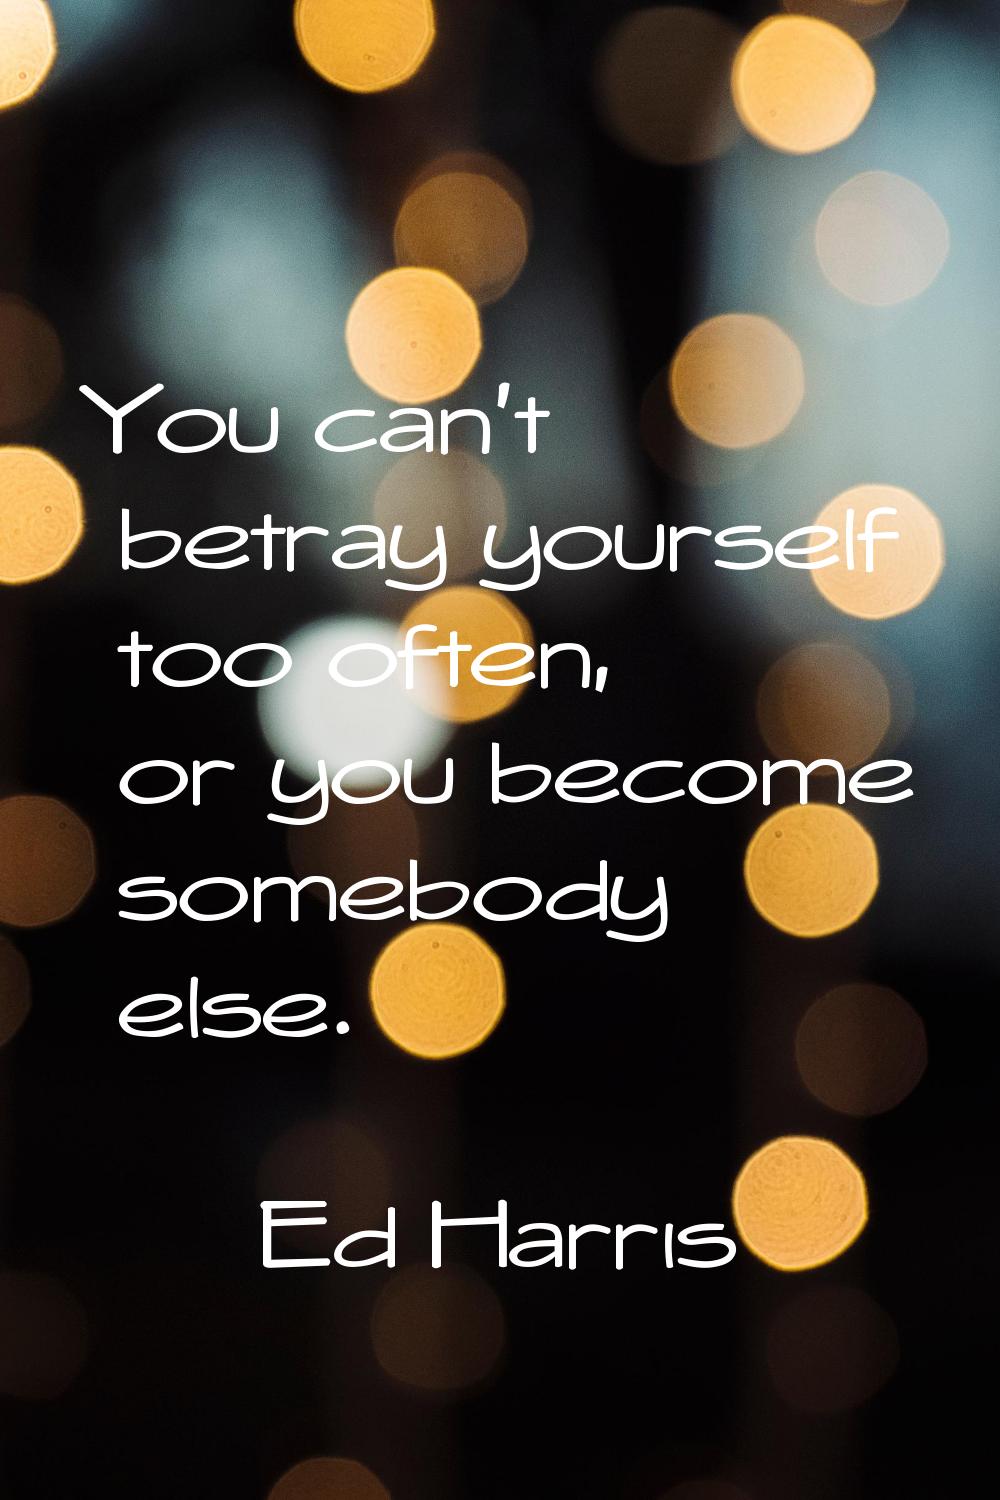 You can't betray yourself too often, or you become somebody else.